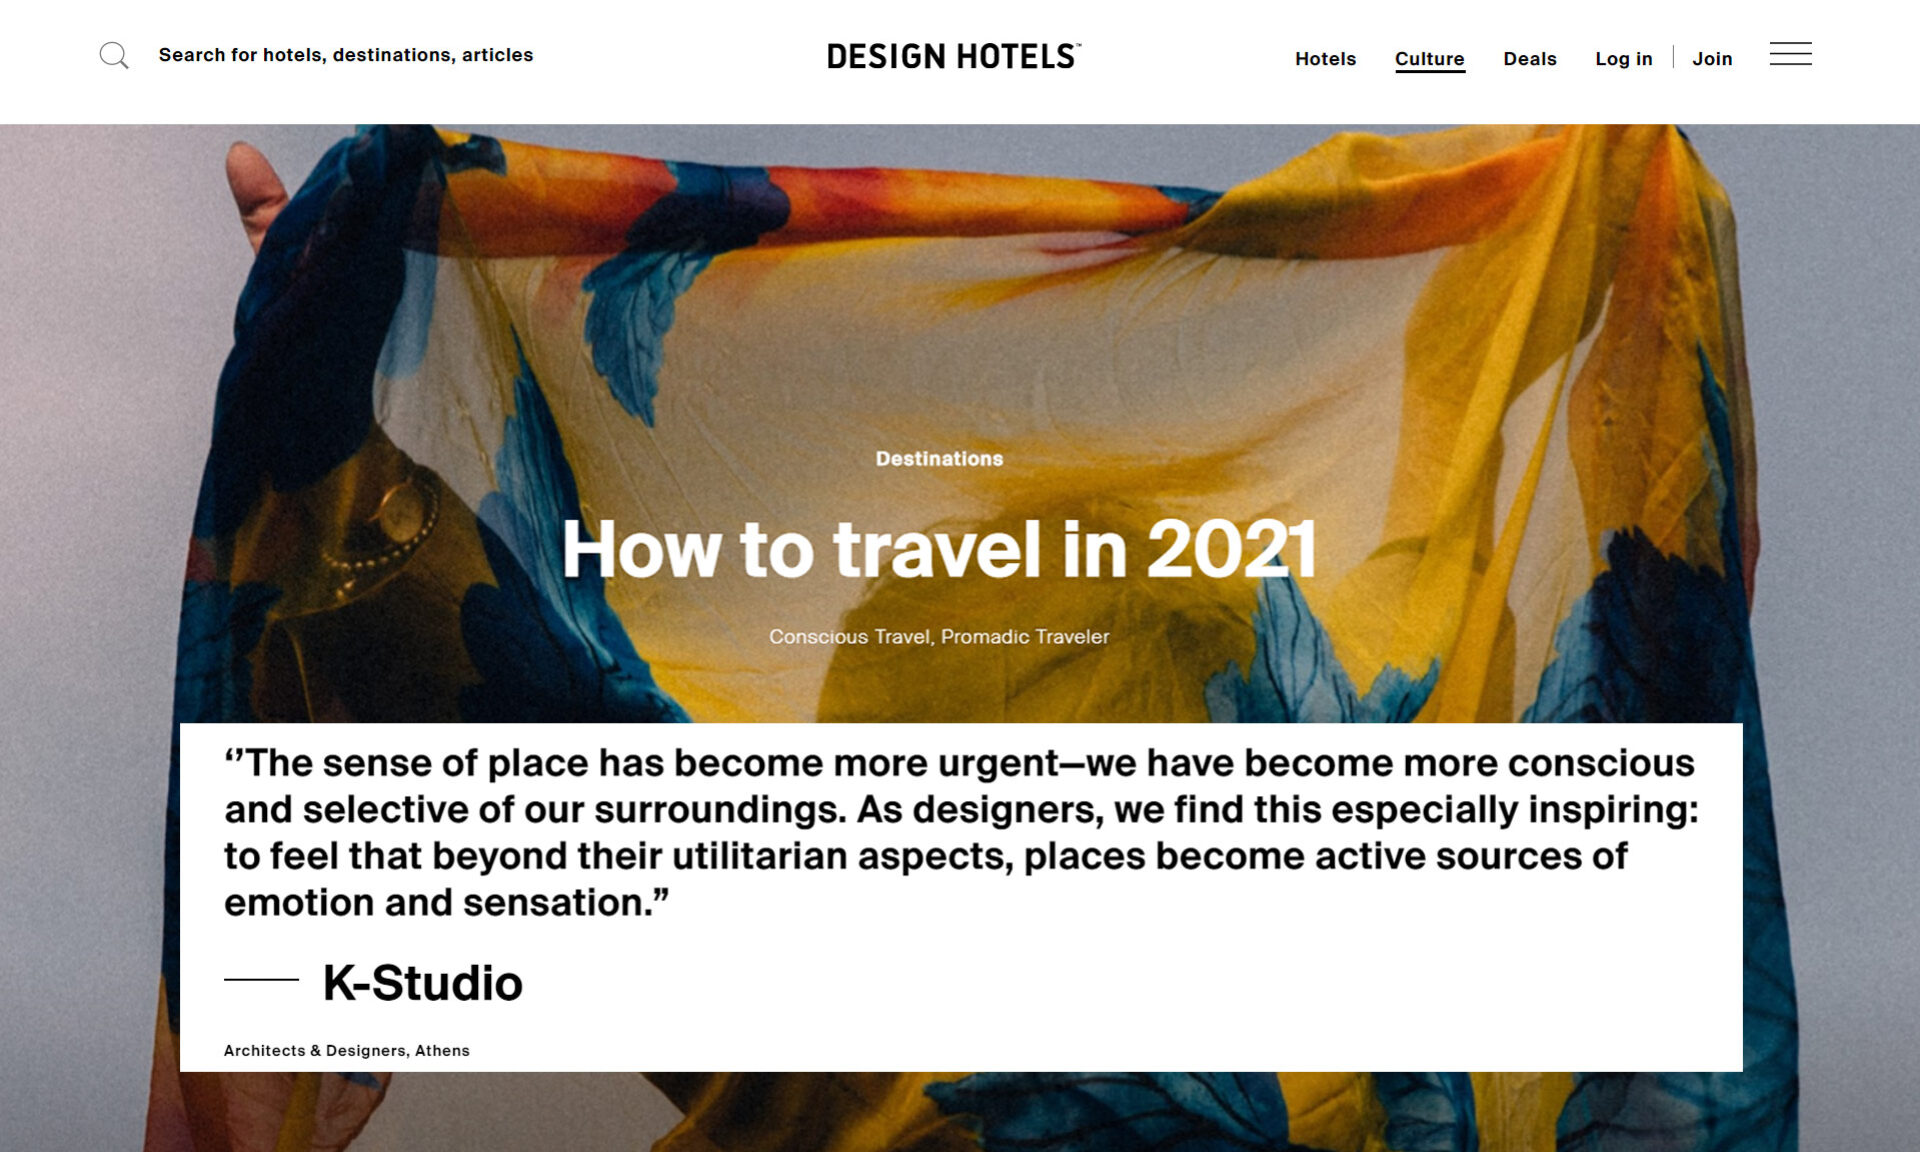 “How to travel in 2021” by Design Hotels